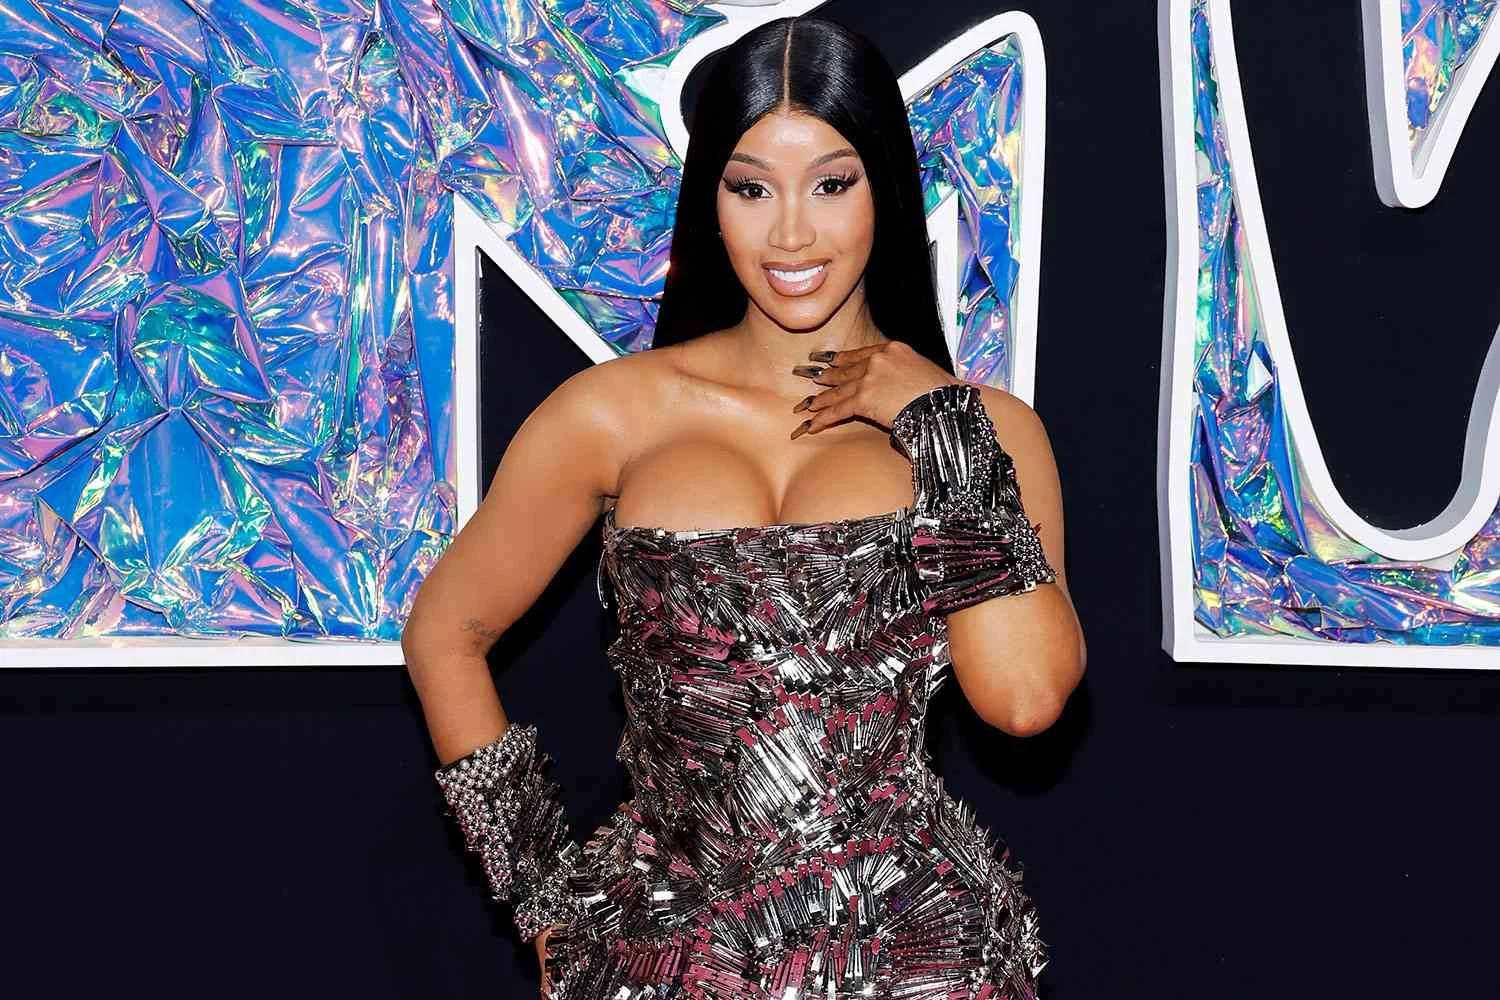 Cardi B and her ex, Offset, had a great time together on New Year’s Eve